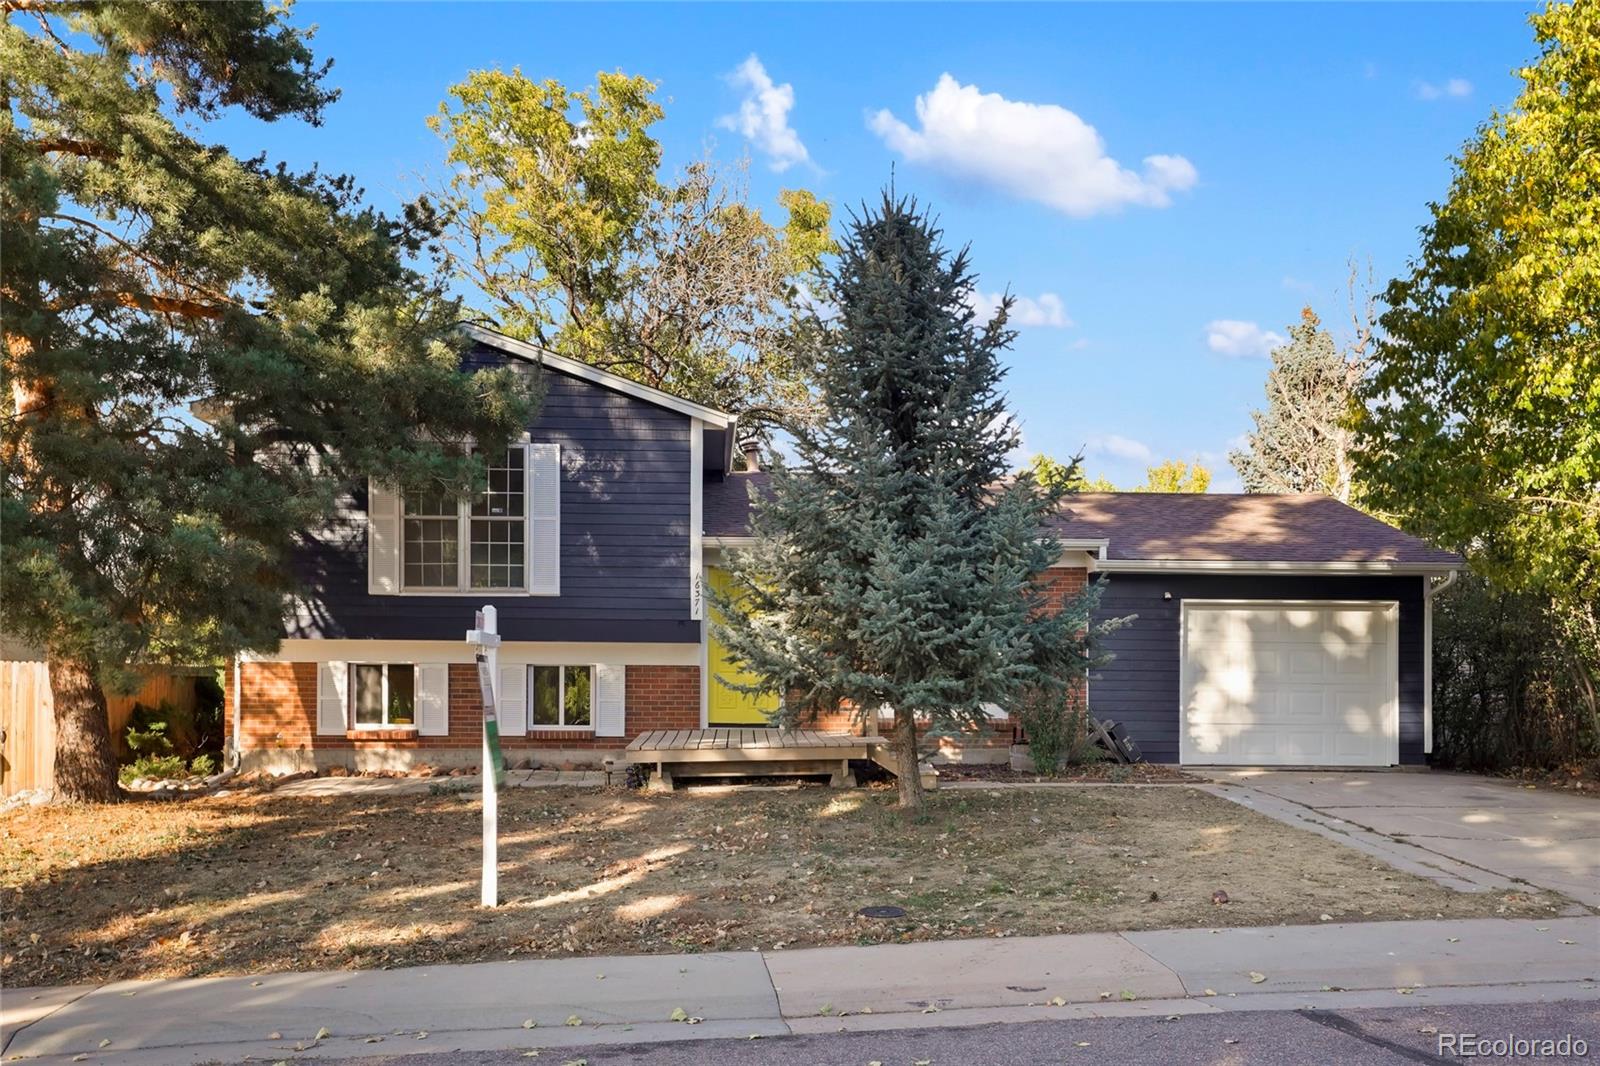 16371 e idaho place, Aurora sold home. Closed on 2024-01-16 for $475,000.